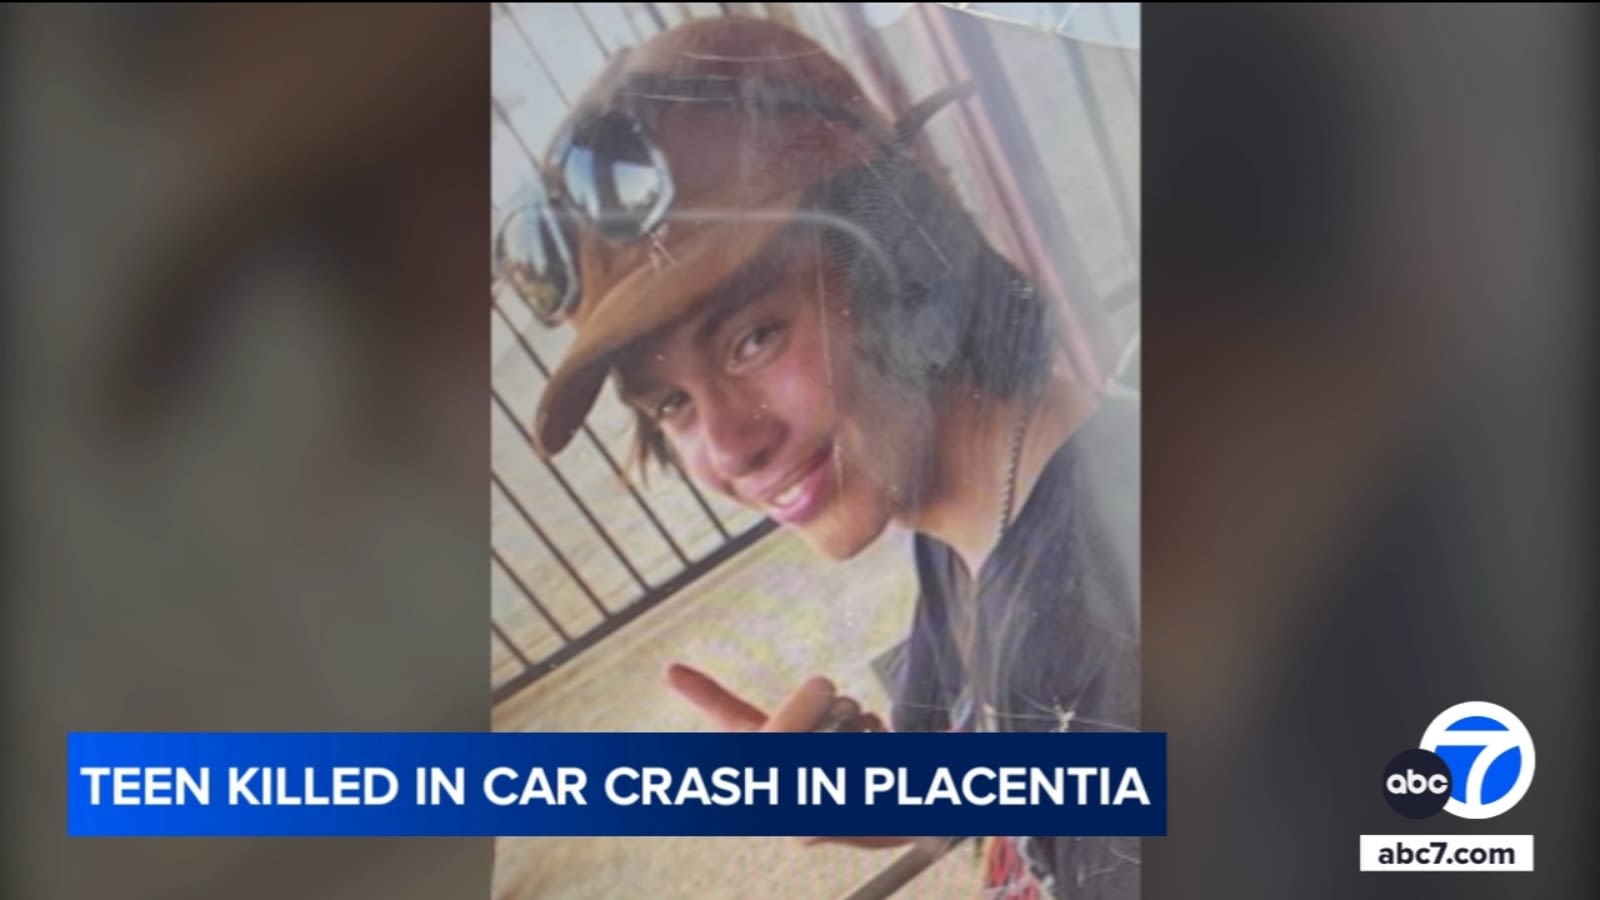 17-year-old student ID'd after being killed in 2-car crash while driving to school in Placentia